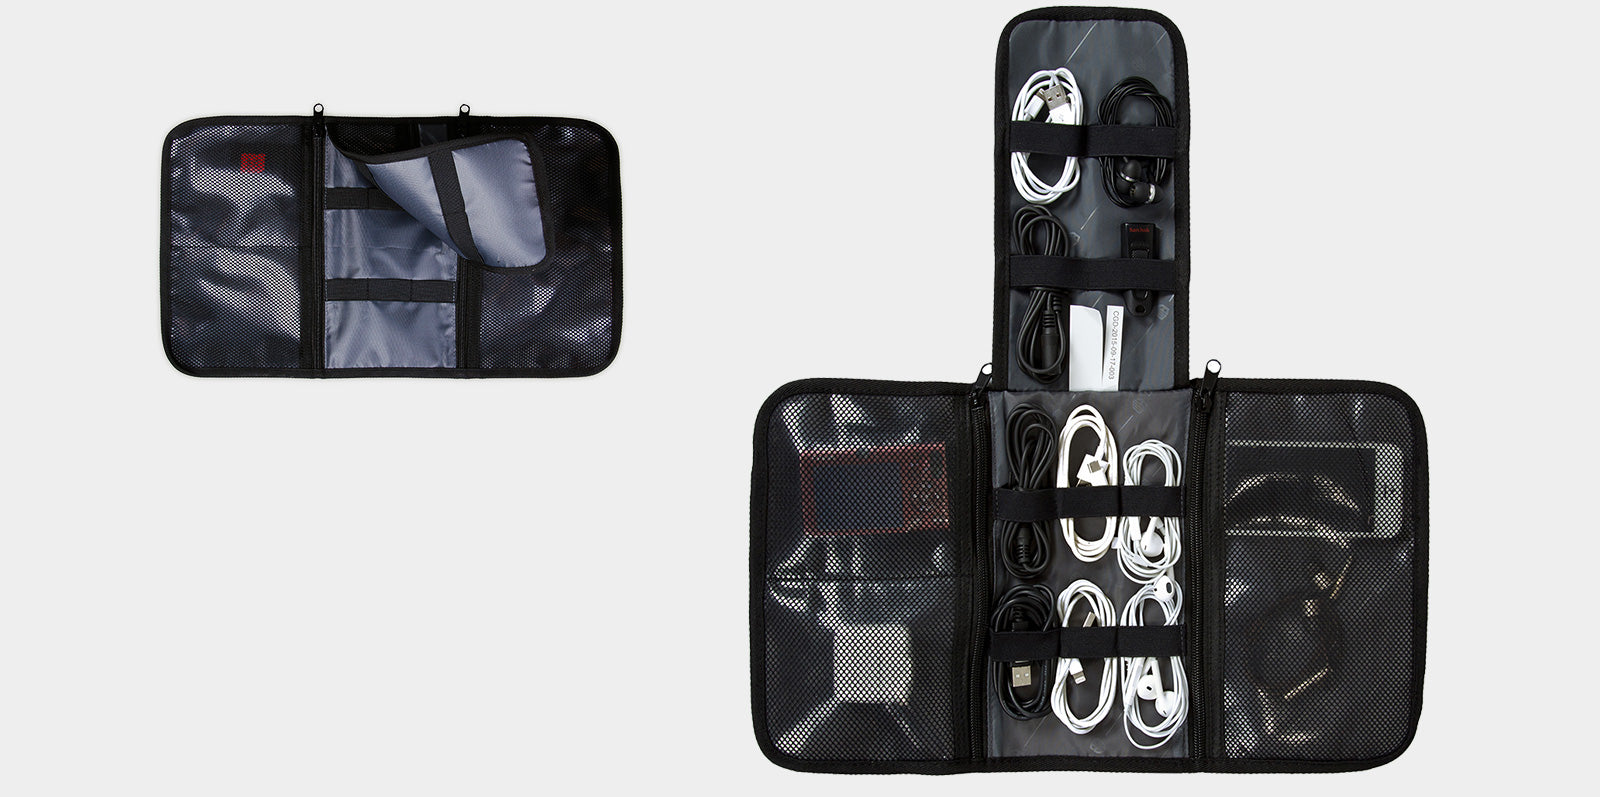 2-in-1 Travel USB Cable Organizer Storage Bag Travel Carry-on Electronic Accessories Case